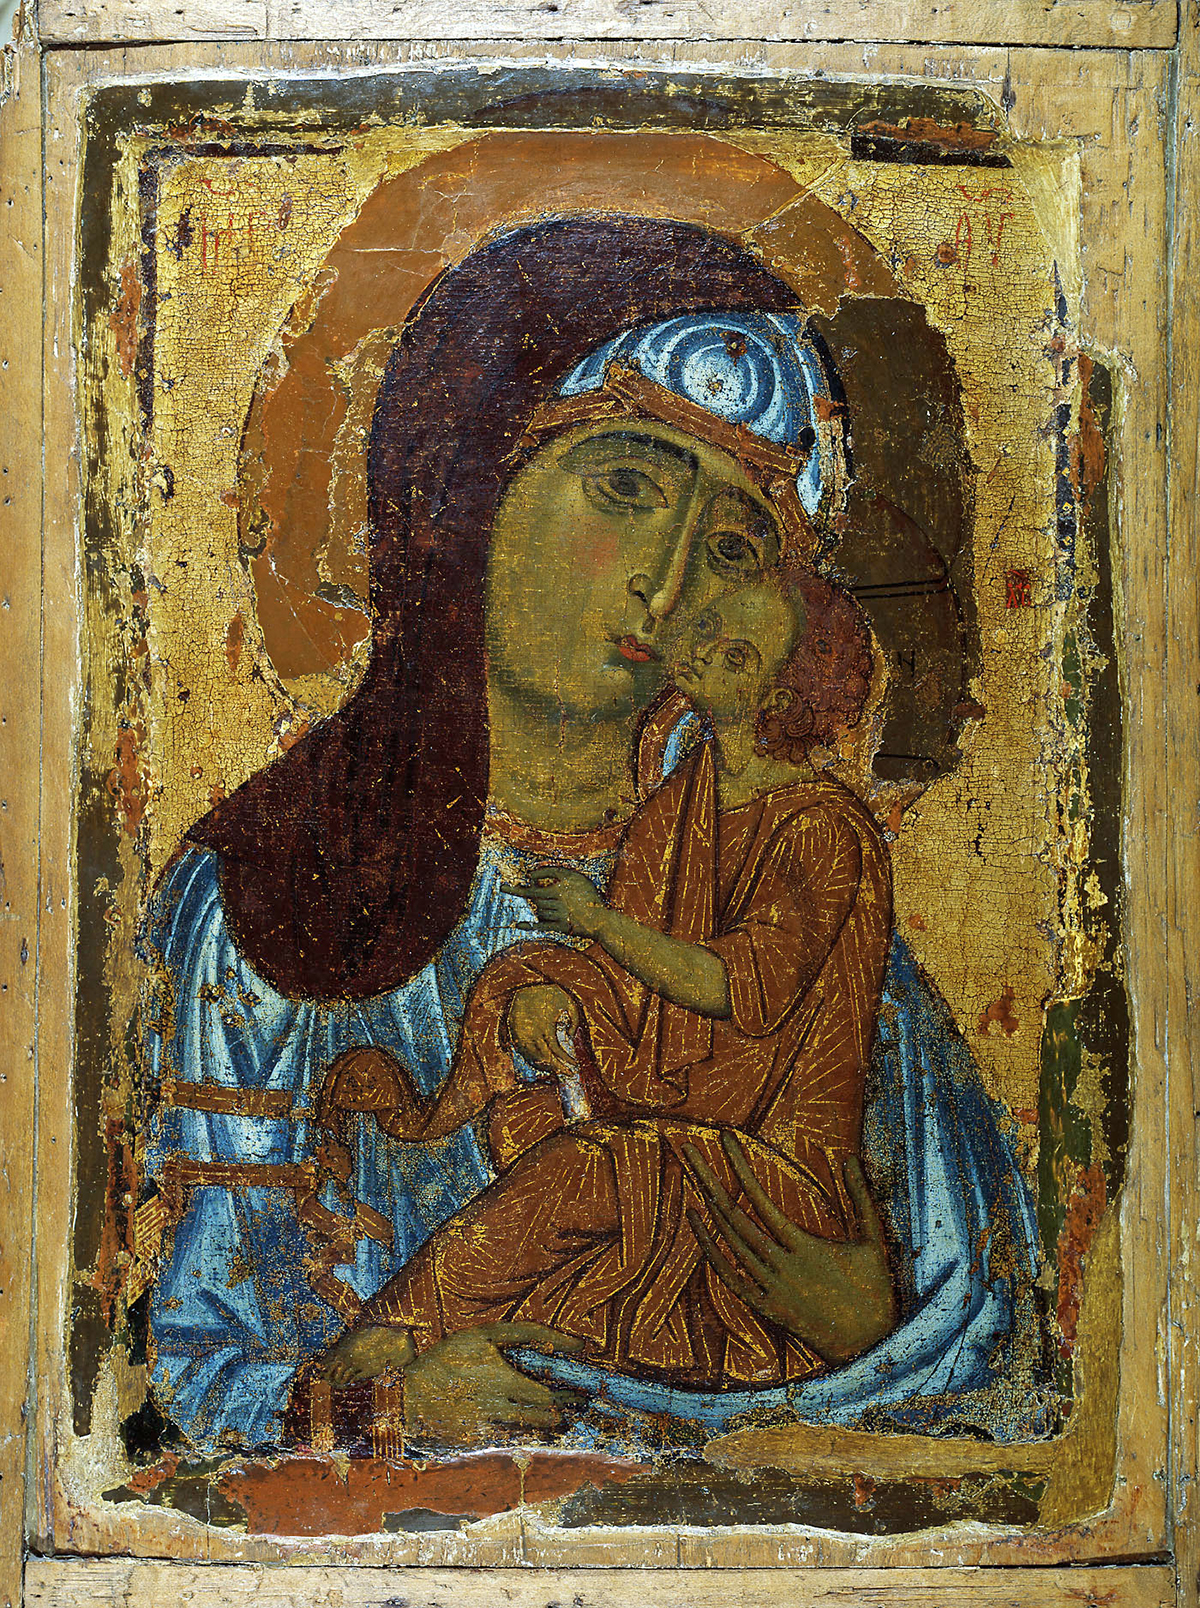 OUR LADY OF TENDERNESS